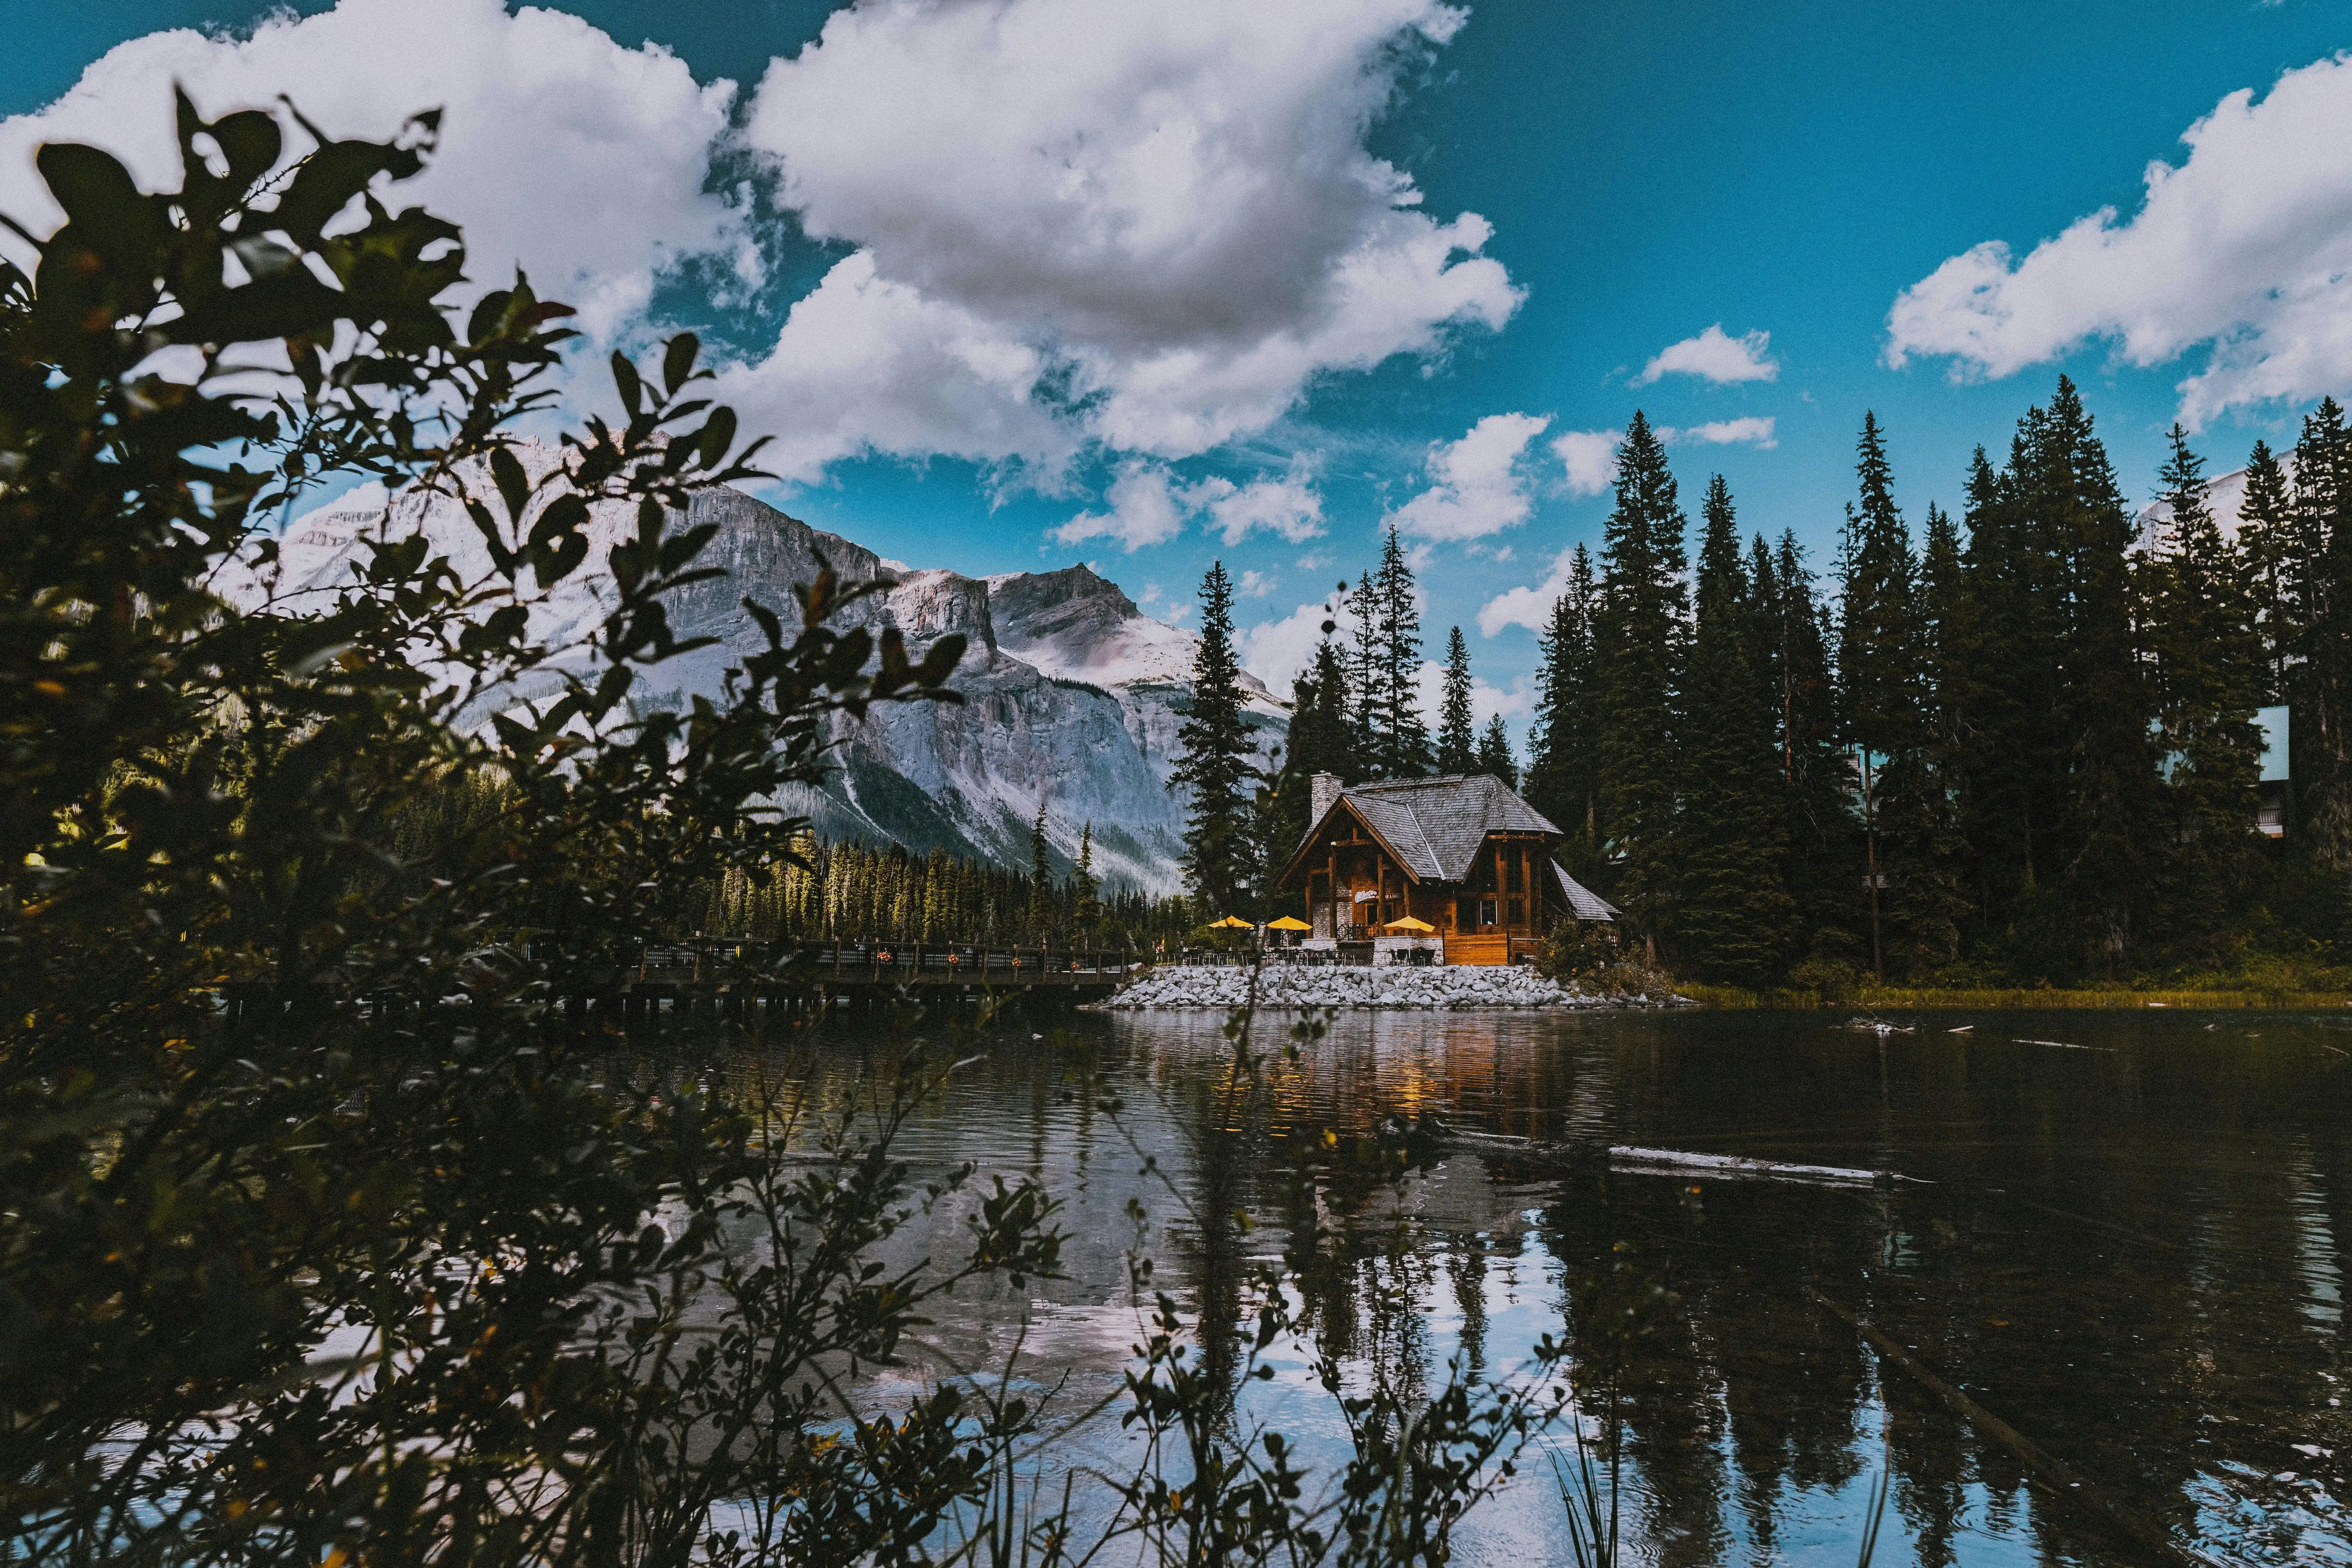 A serene cabin is nestled amongst pines, surrounded by a calm lake with snowy mountains behind it.